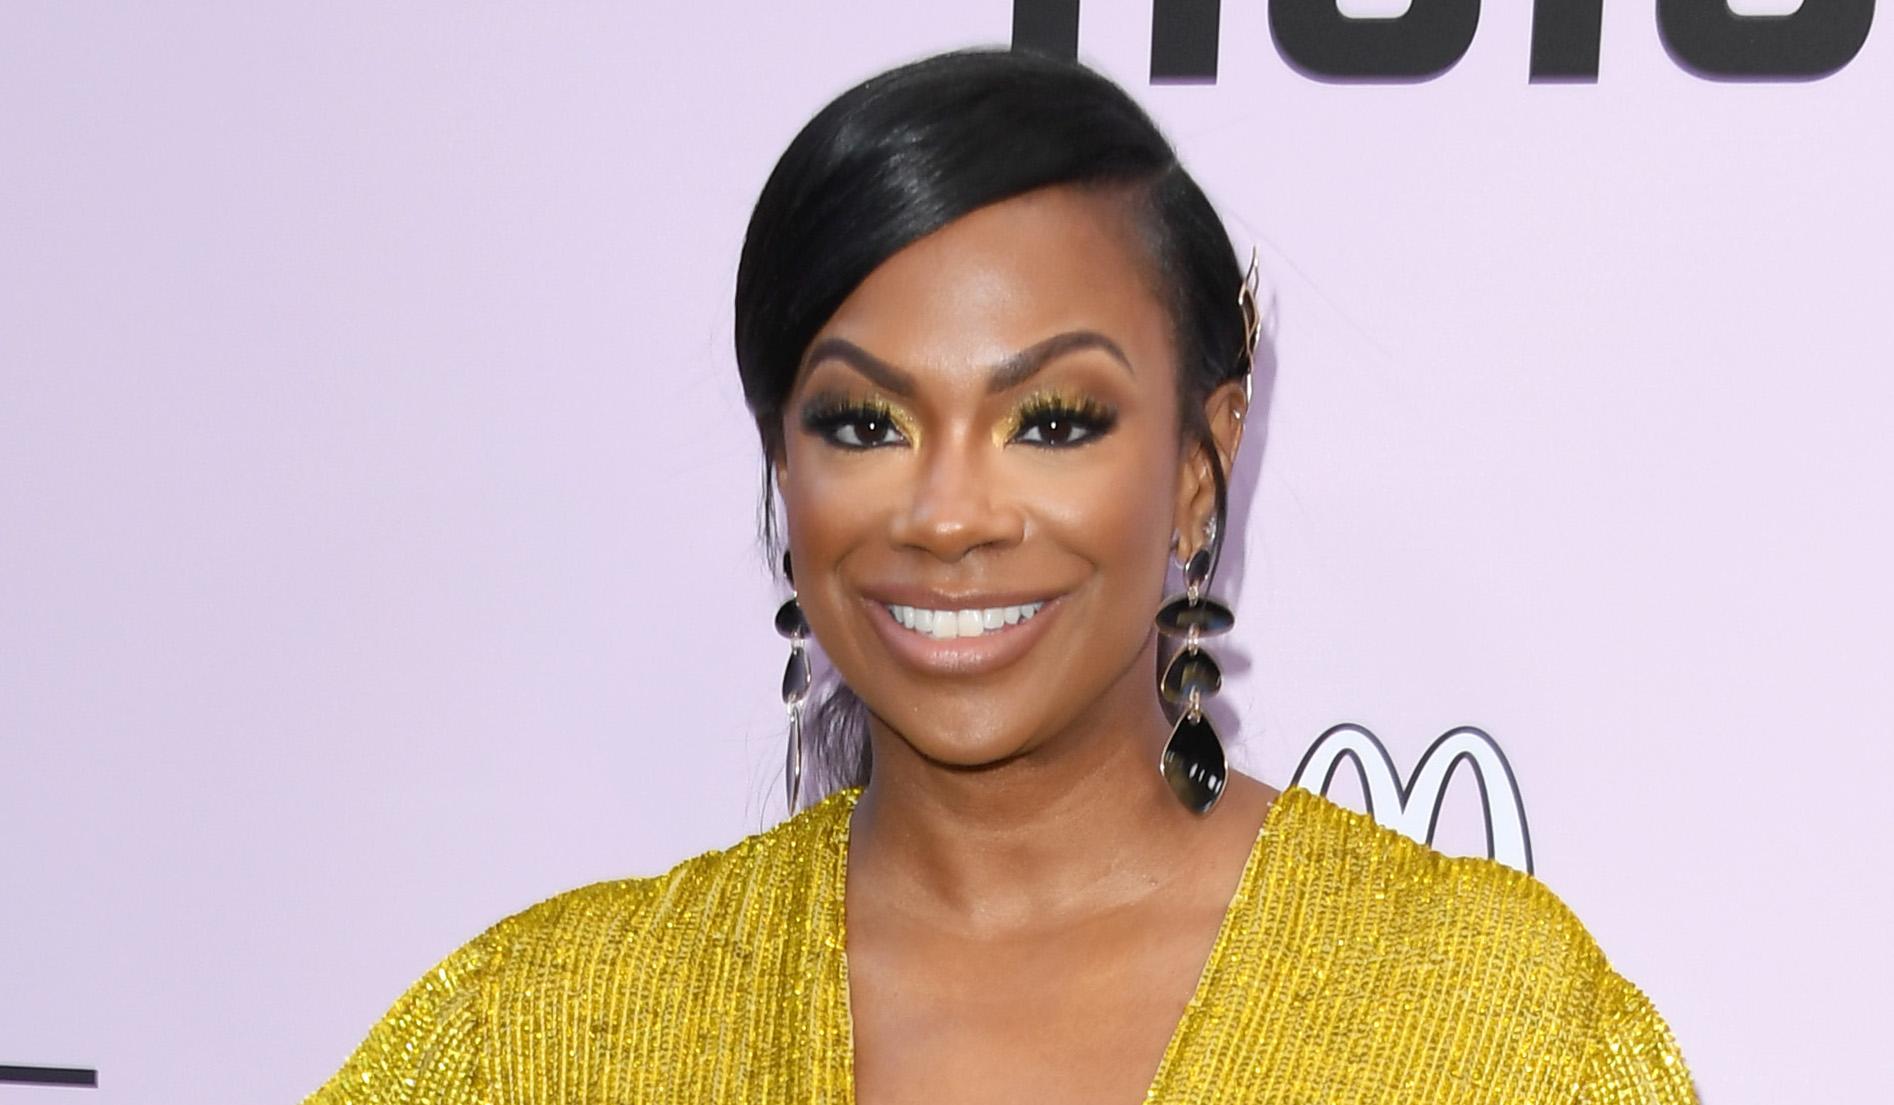 Kandi Burruss Responds To Claim Restaurant Charged For Ice Cubes